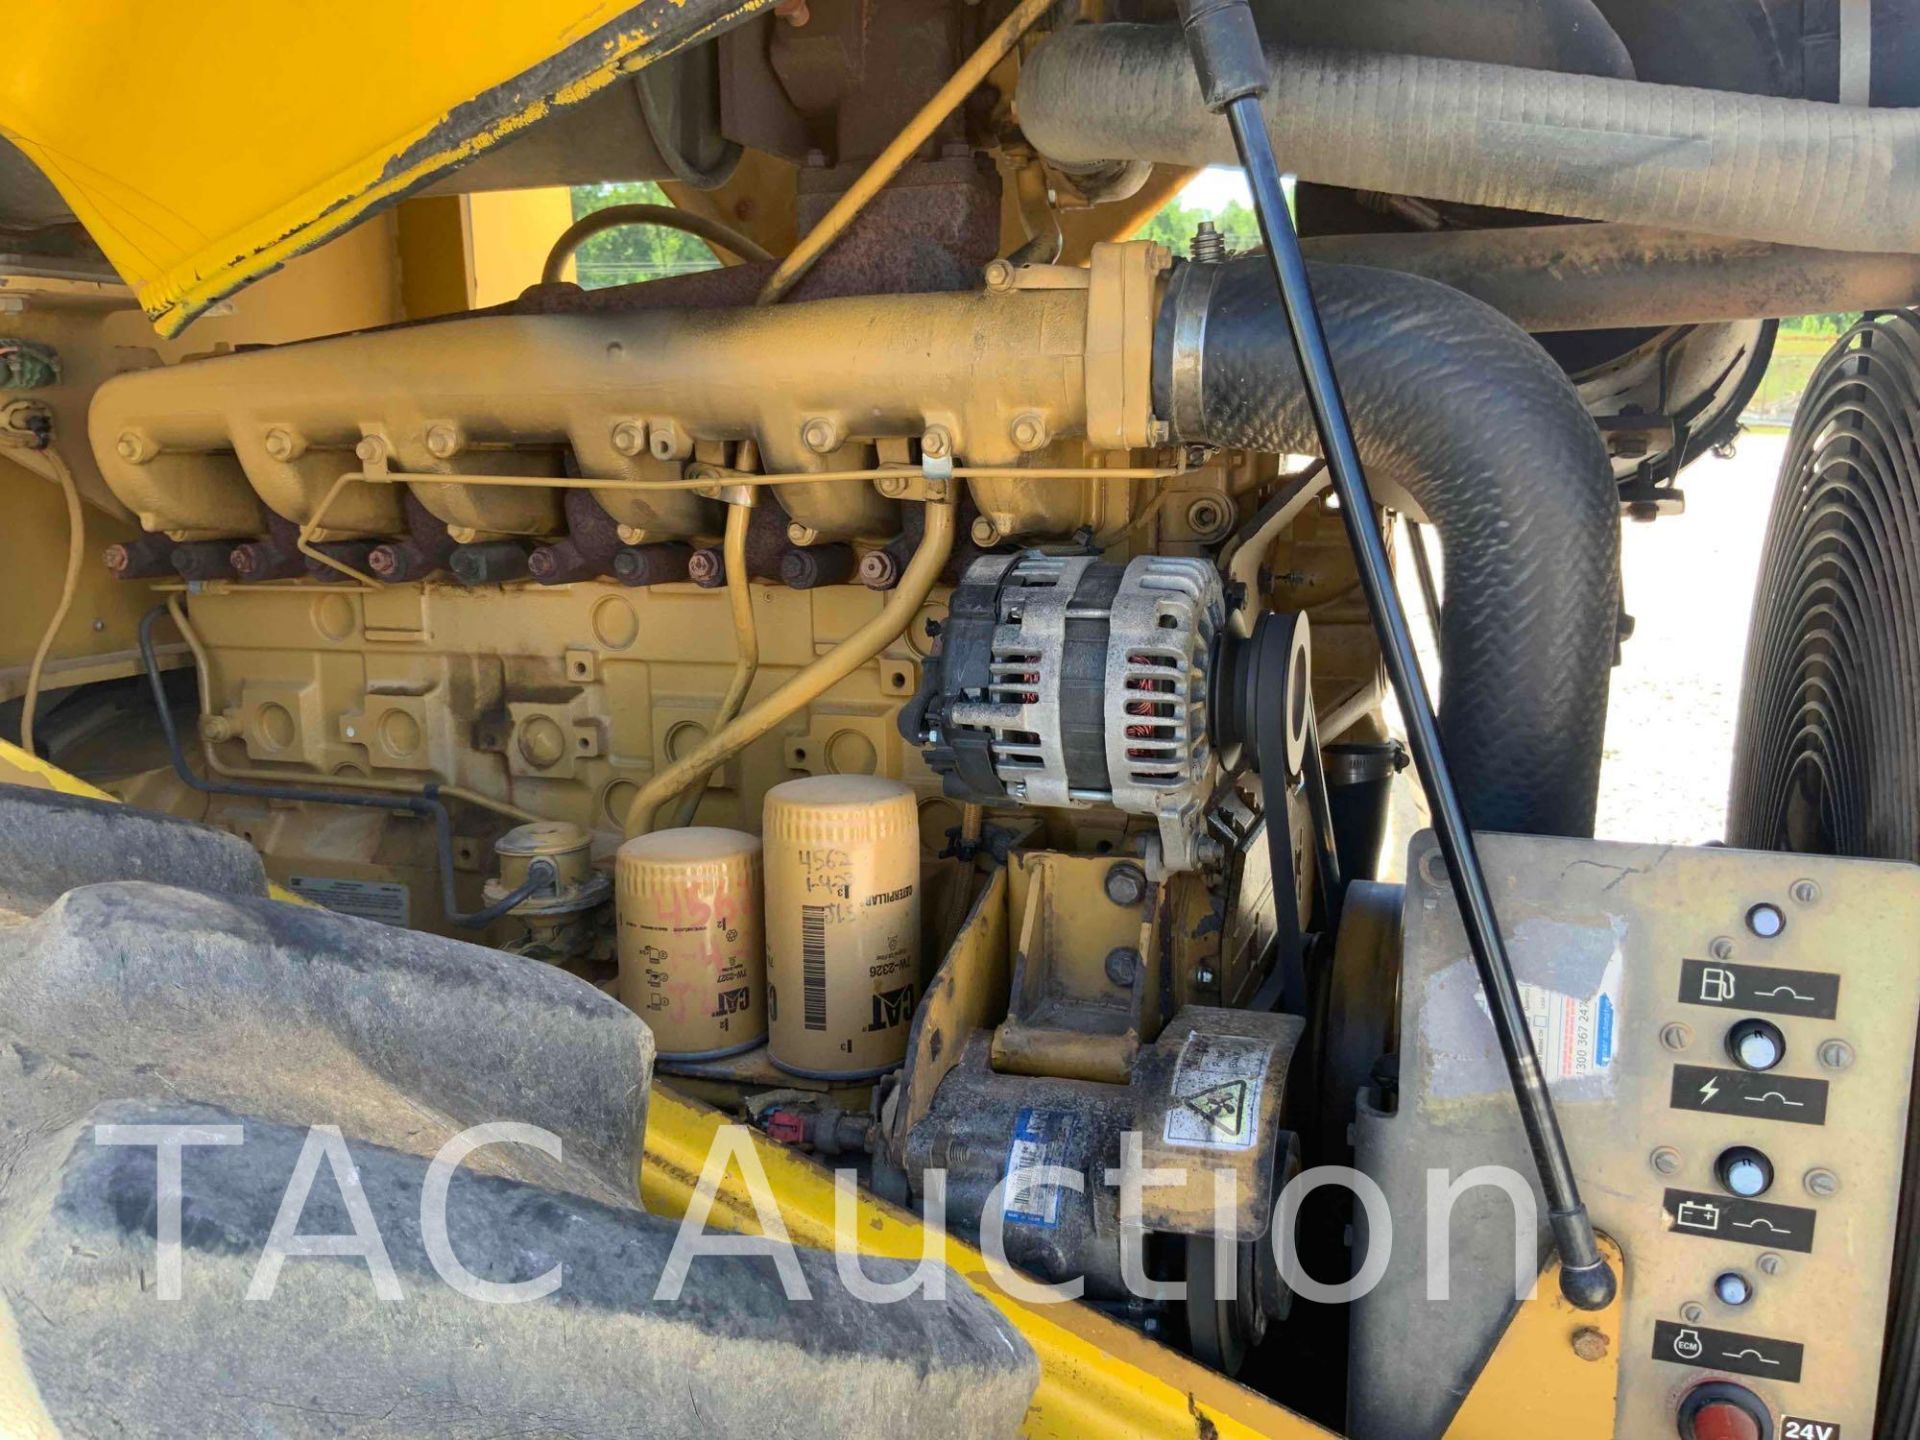 2004 Caterpillar CP-563E Padfoot Vibratory Compactor Roller - Image 36 of 51